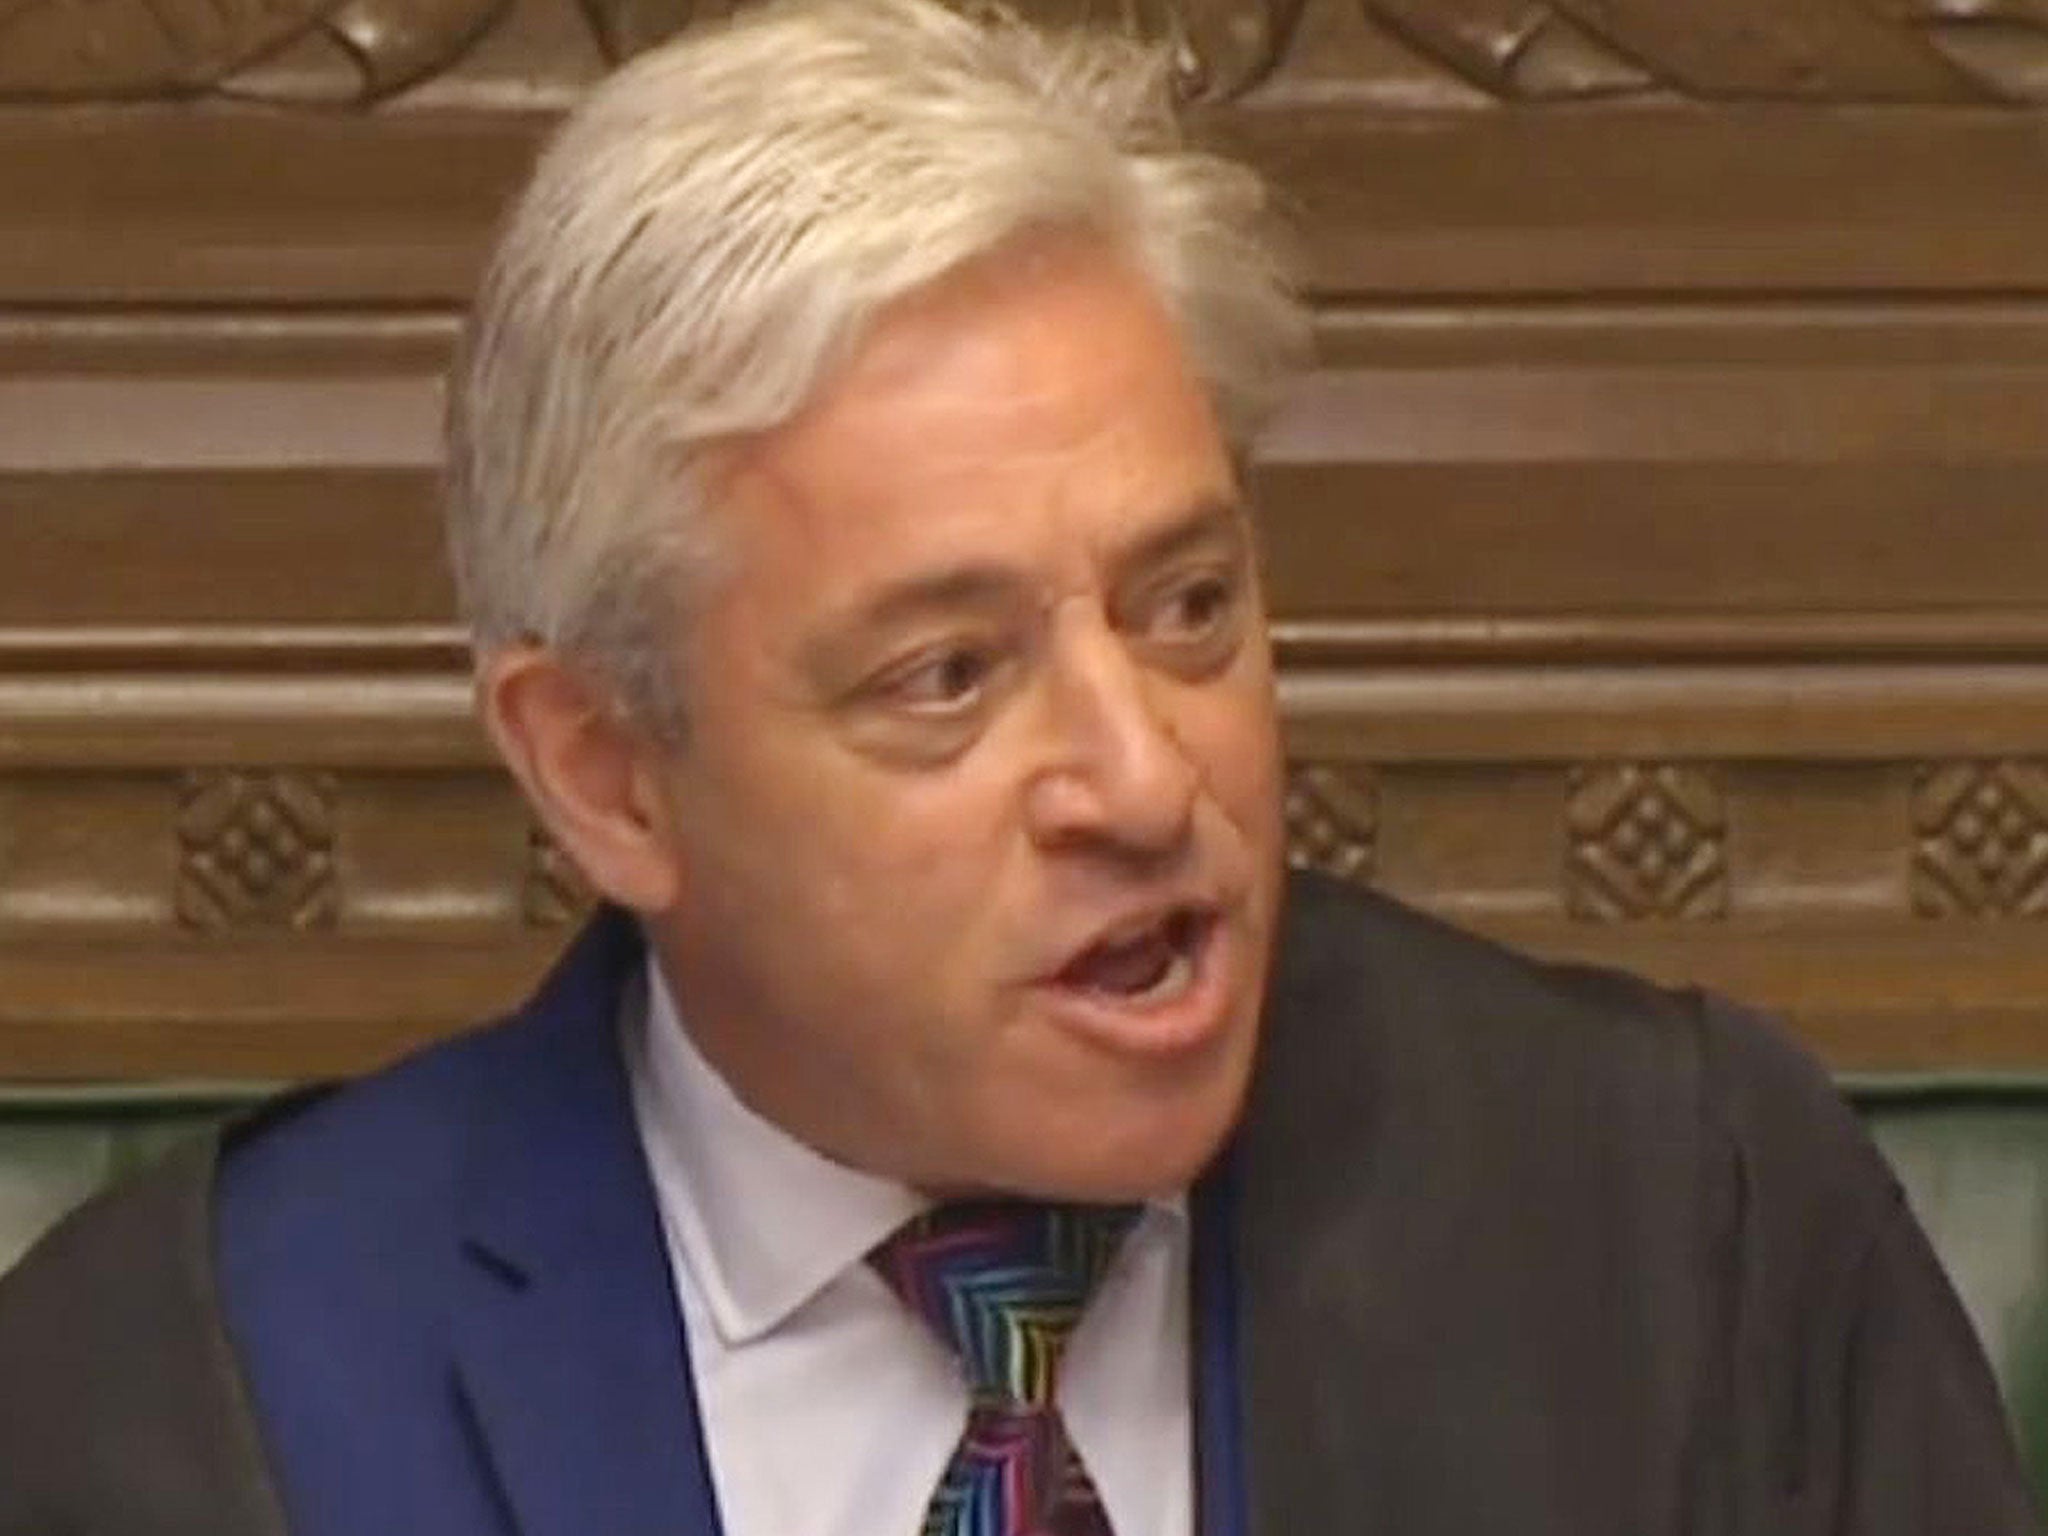 Theresa May says speaker John Bercow&apos;s alleged &apos;stupid woman&apos; comments are unacceptable